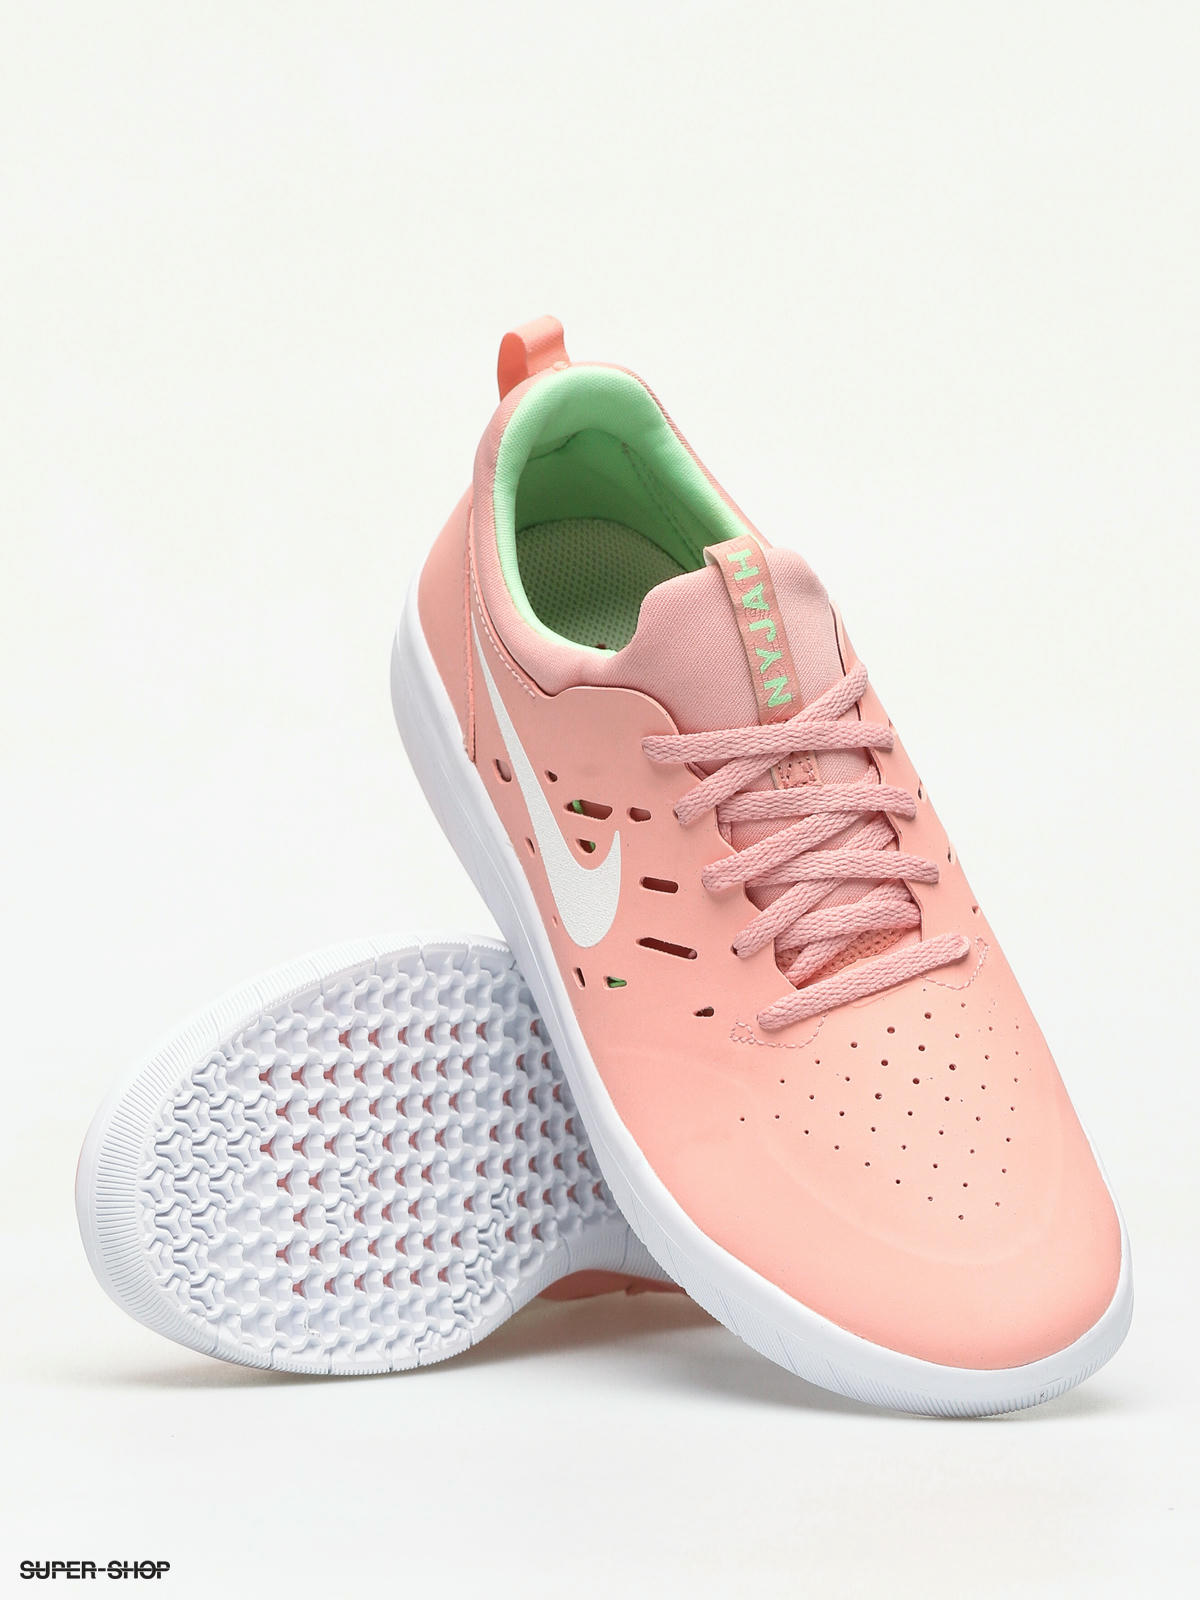 Nike SB Free Shoes coral/white aphid green)